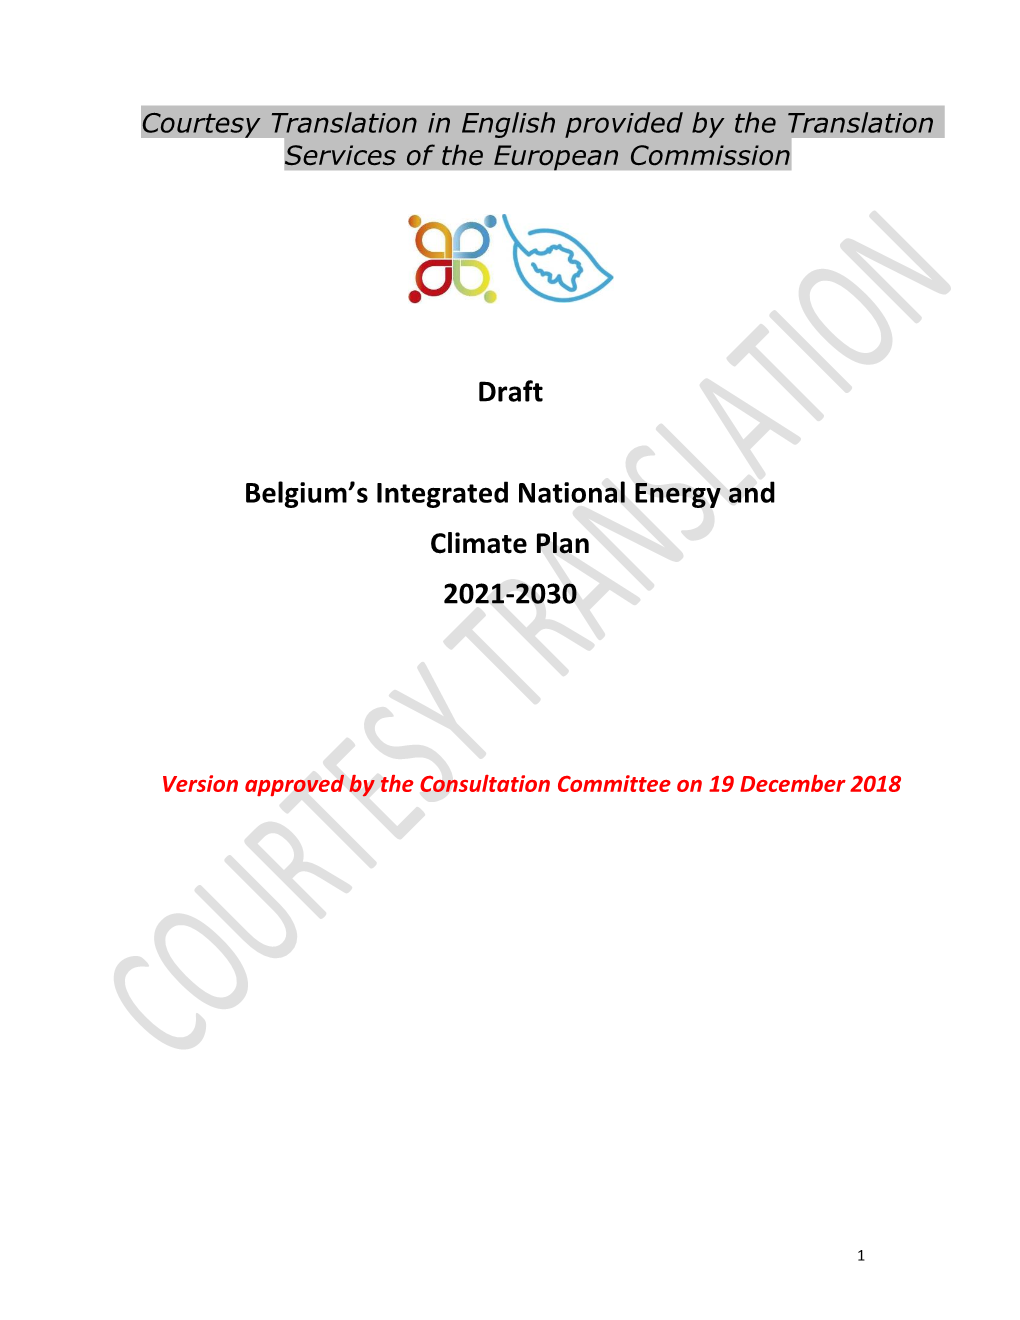 Draft Belgium's Integrated National Energy and Climate Plan 2021-2030